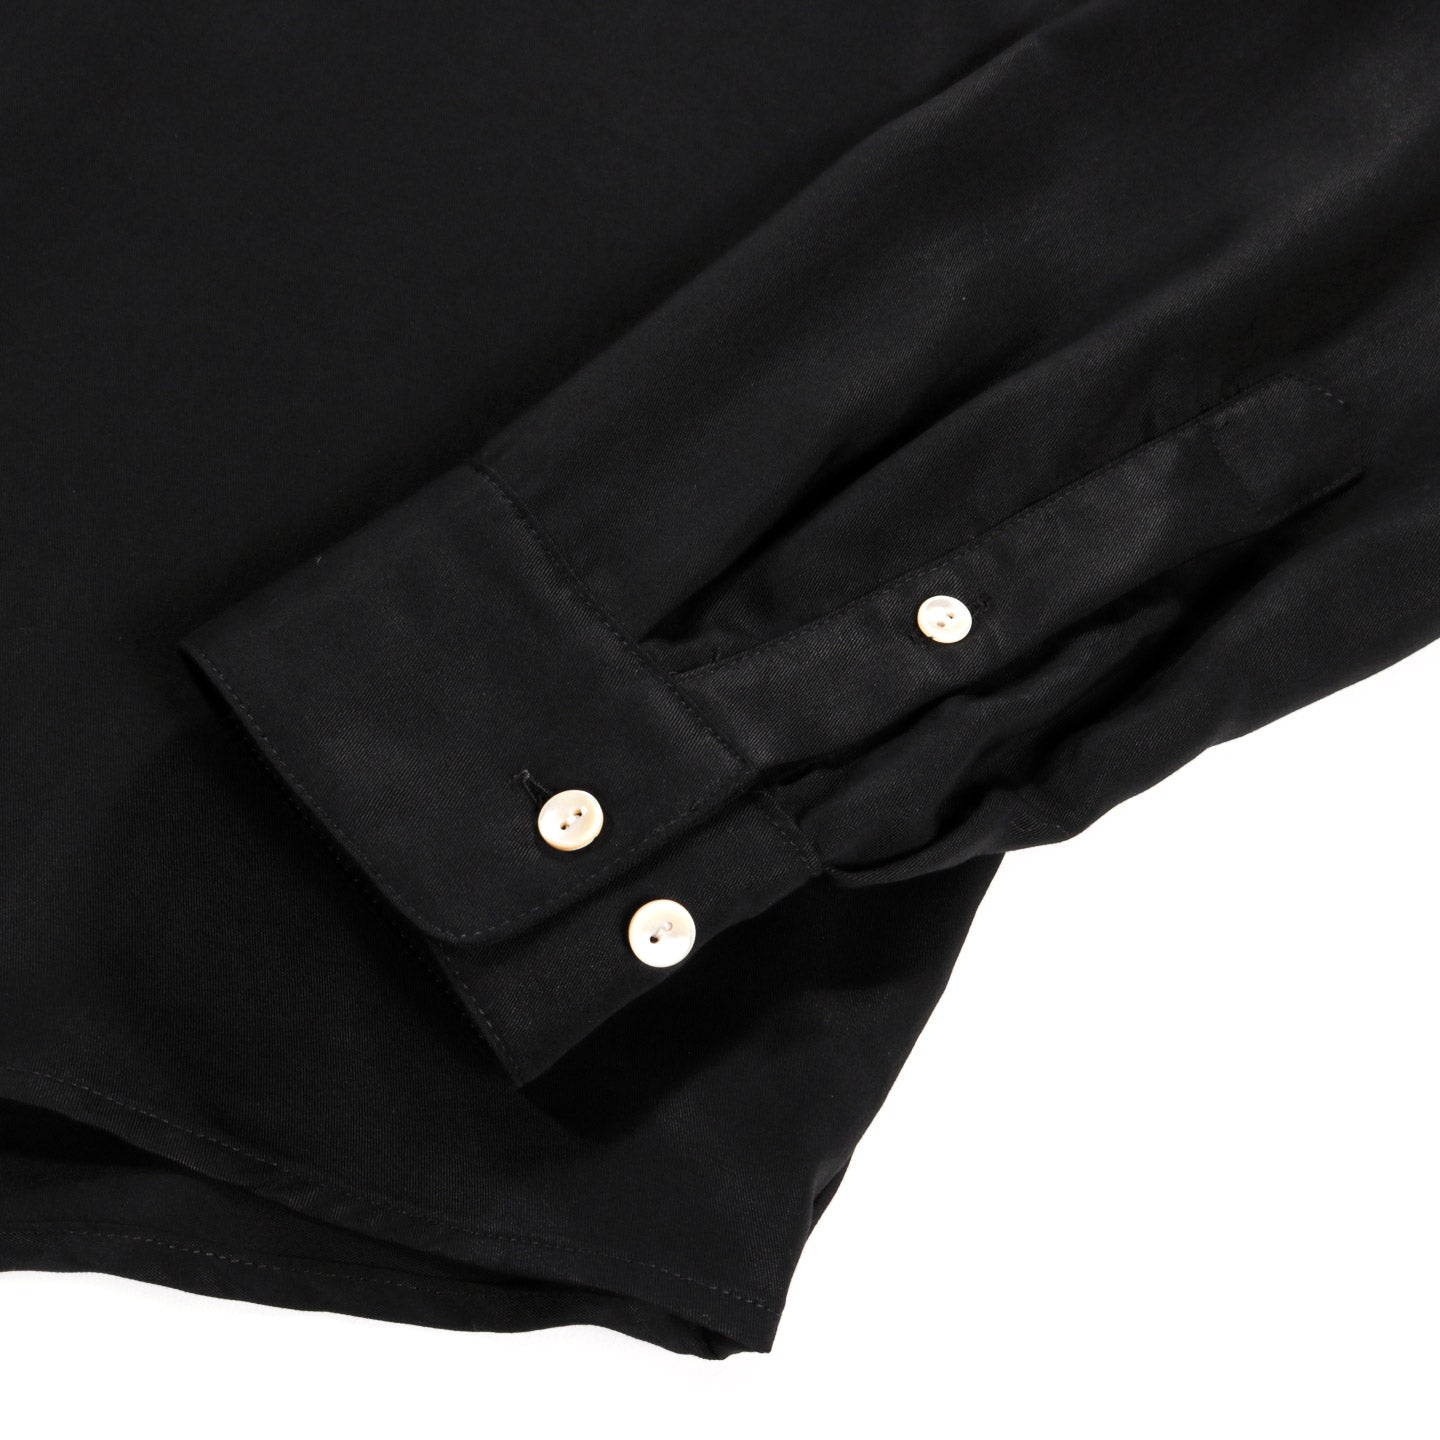 A KIND OF GUISE FULVIO SHIRT MELTED BLACK